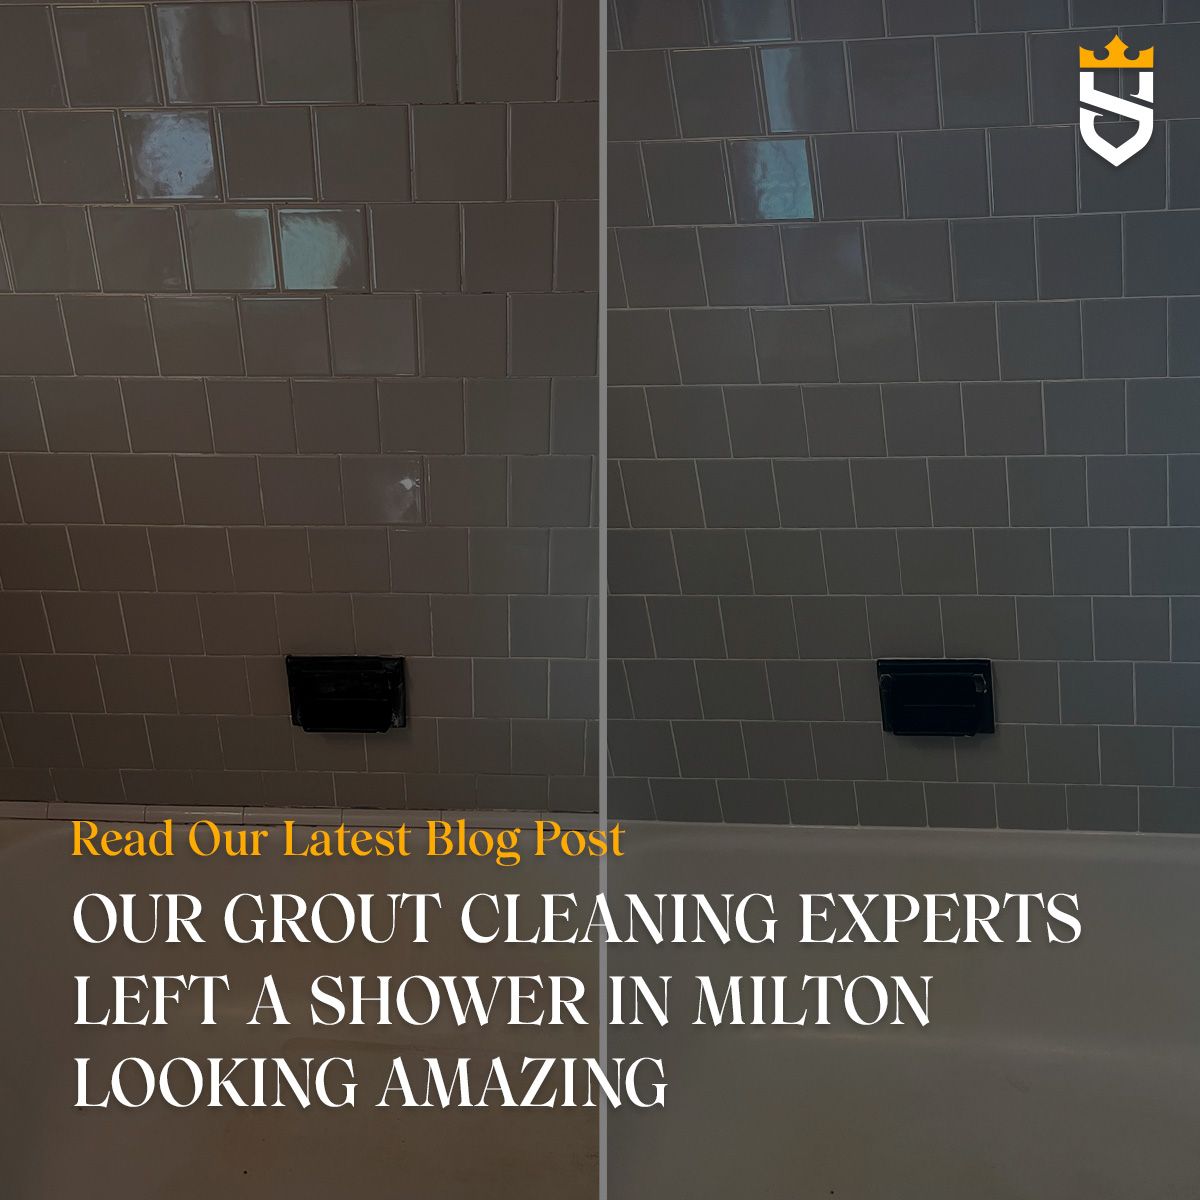 Our Grout Cleaning Experts Left a Shower in Milton Looking Amazing